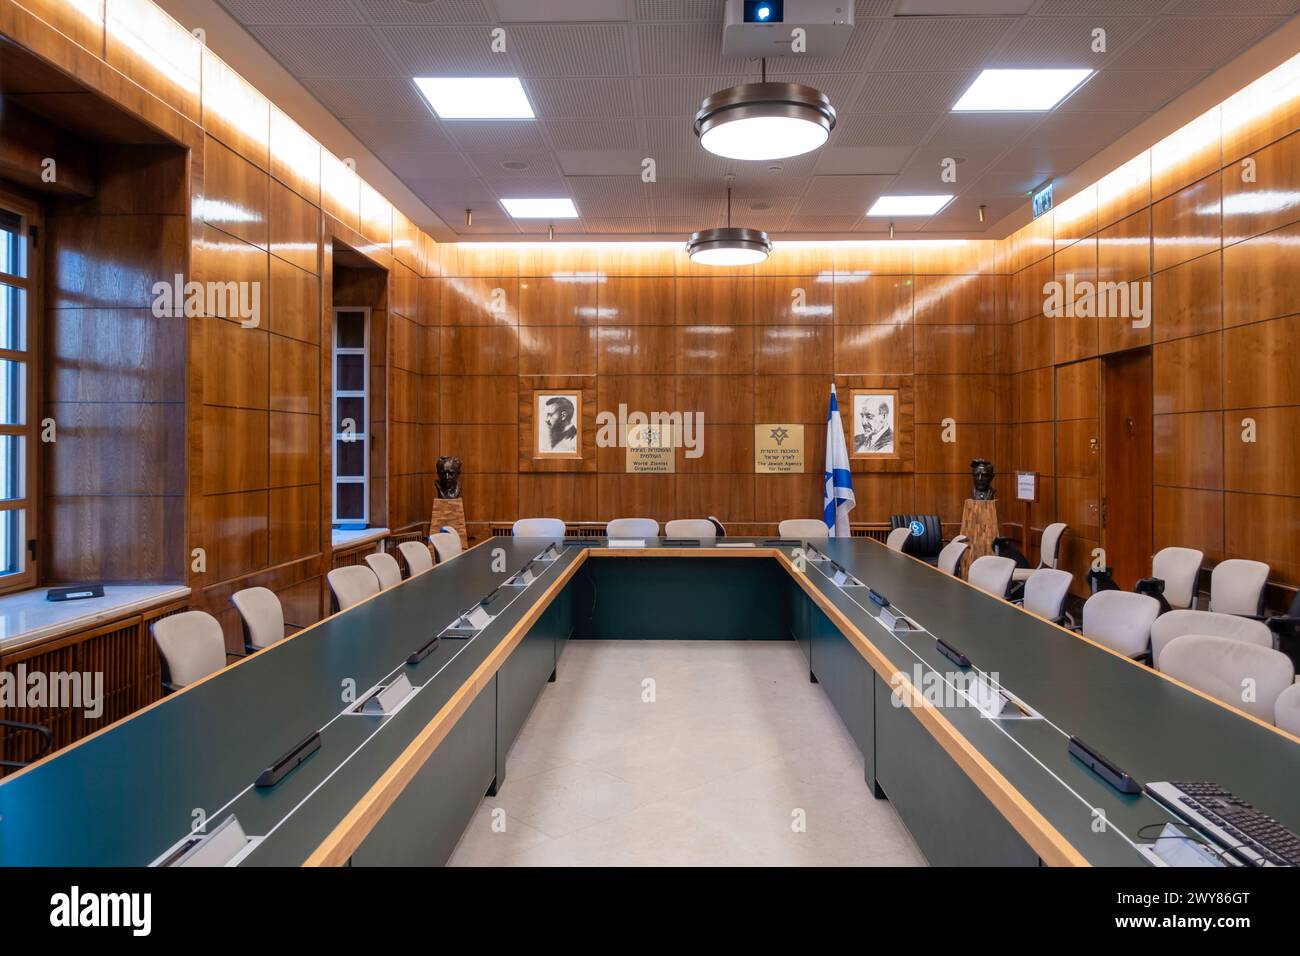 David Ben Gurion conference hall inside the Jewish Agency for Israel which is the largest Jewish nonprofit organization responsible for the immigration and absorption of Jews and their families from the Diaspora into Israel. Located in Rehavia also Rechavia neighborhood in West Jerusalem Israel Stock Photo